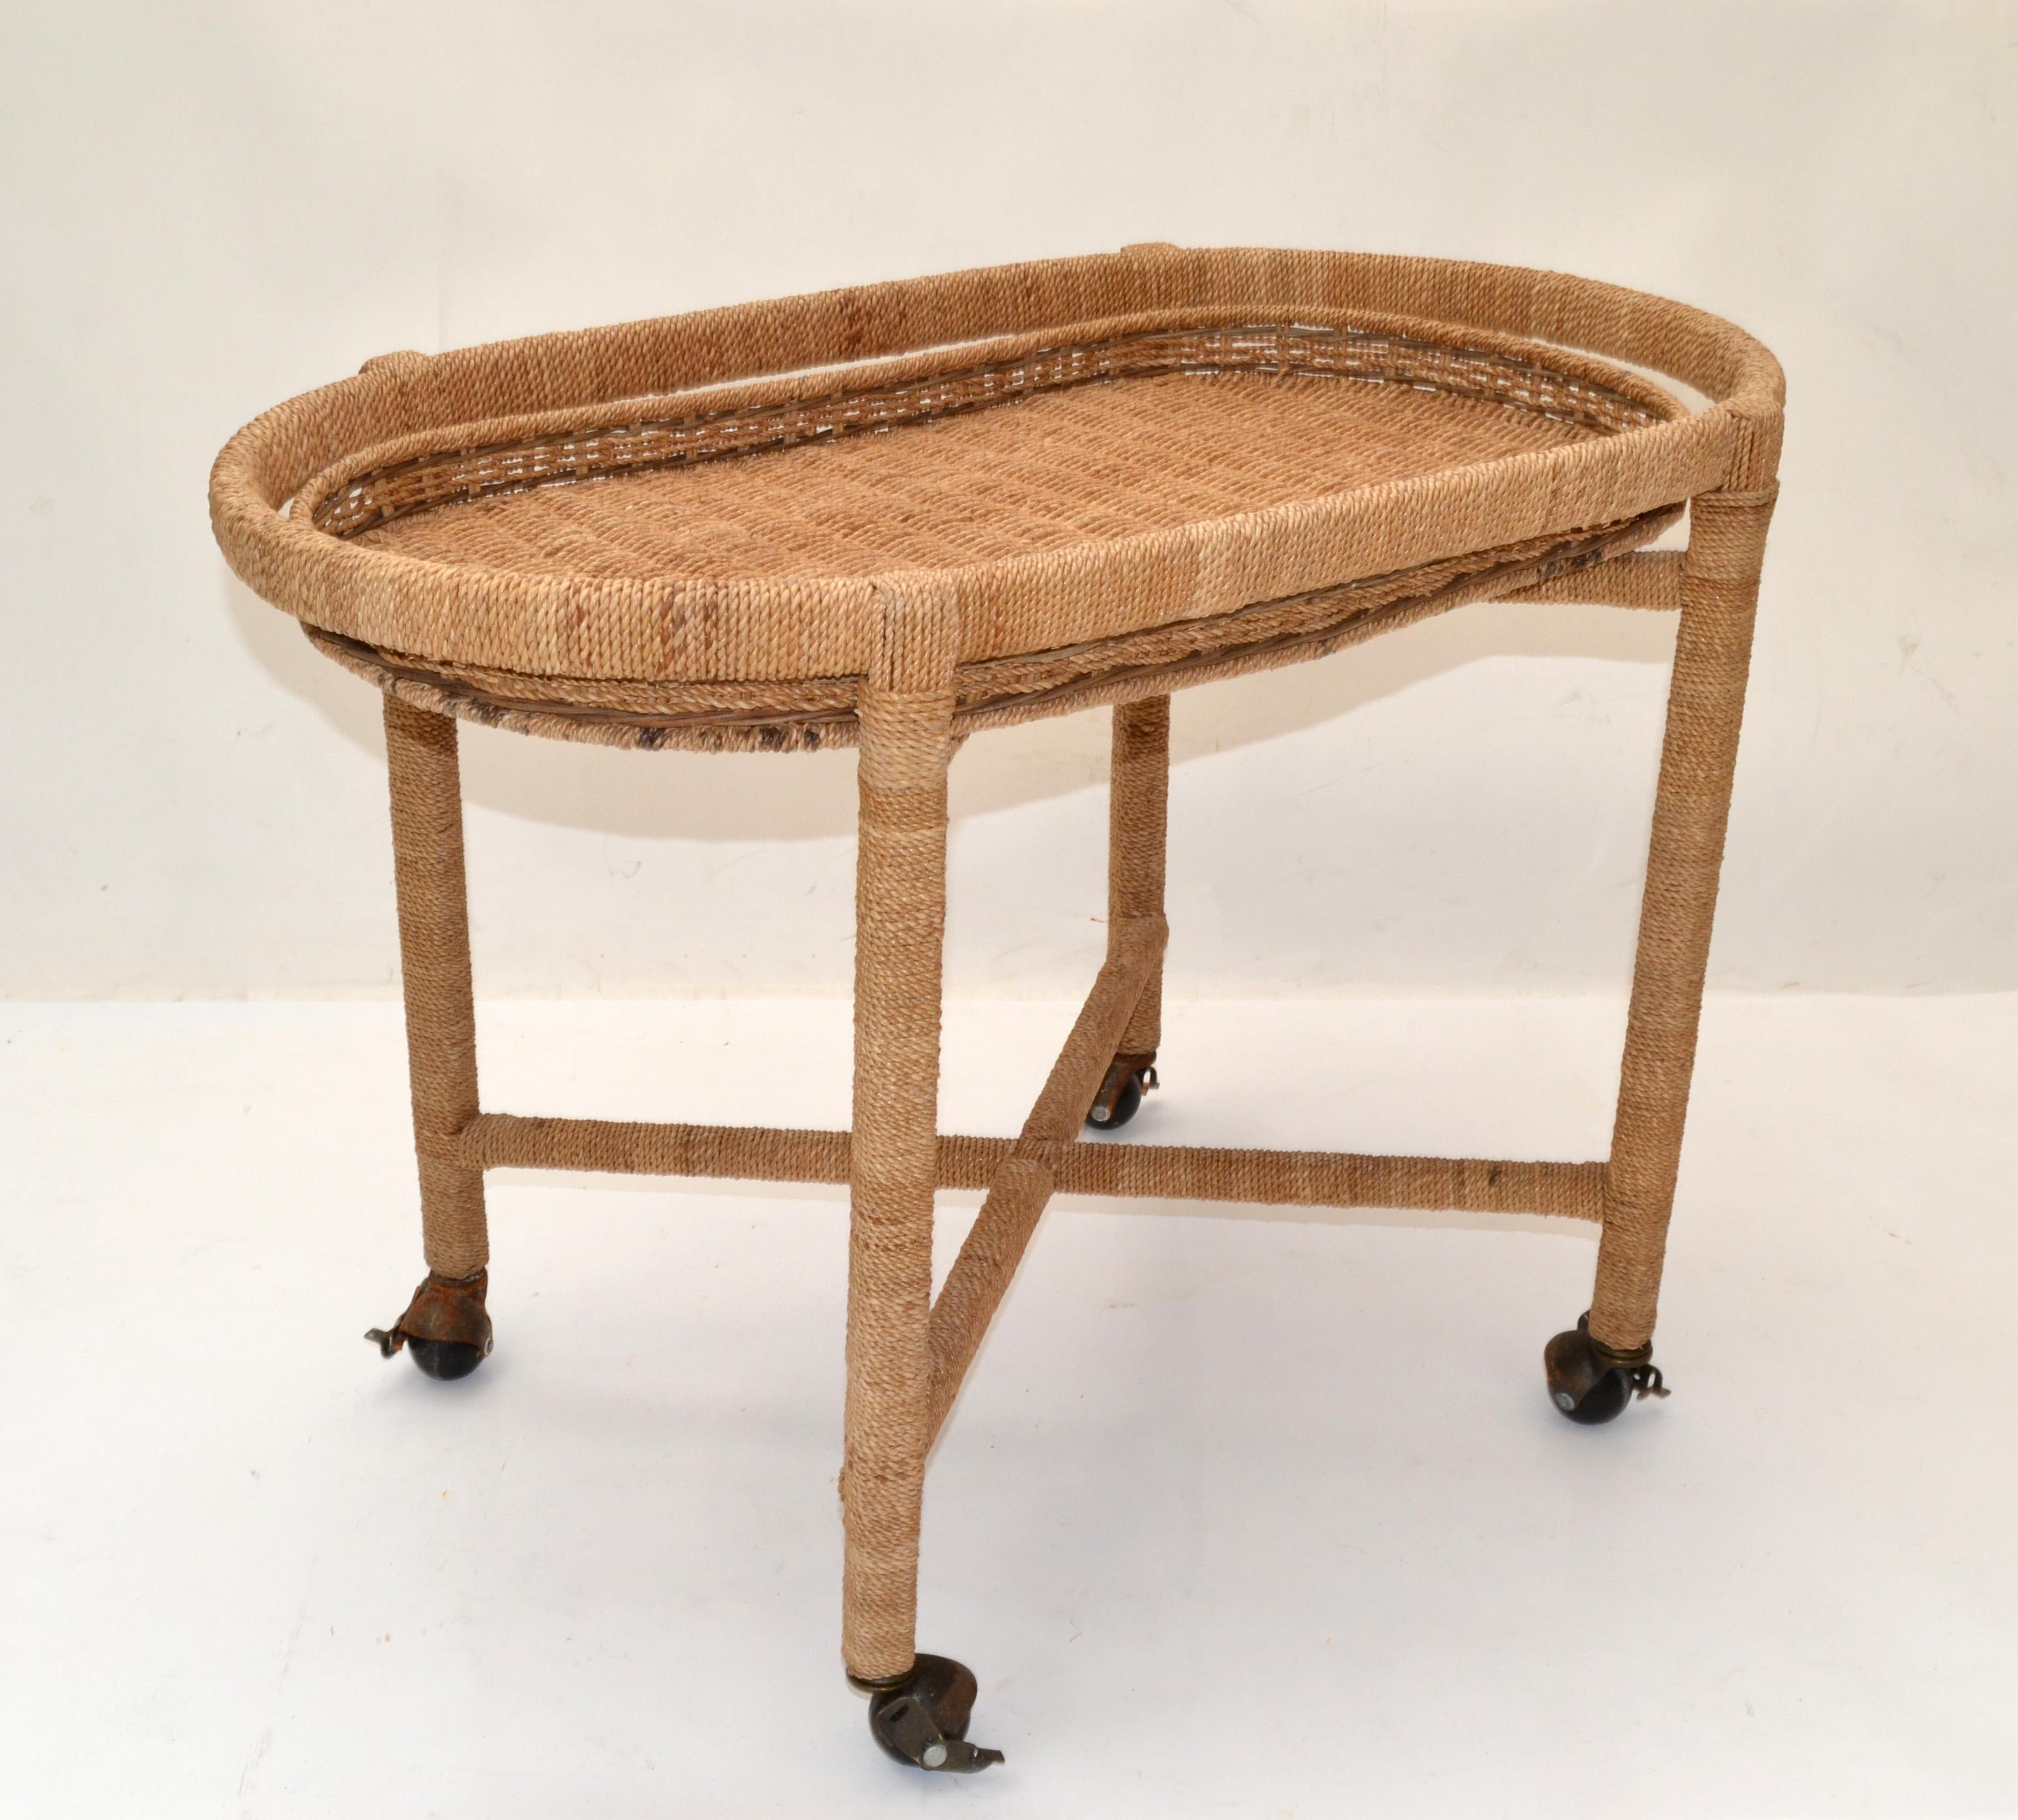 Mid-Century Modern Mario Lopez Torres style rope, wicker, rattan serving trolley, bar cart or tray table on 4 metal casters.
Features a removable handwoven Tray Top and 2 tier Cross Stretcher for support.
Original vintage condition firmly linked